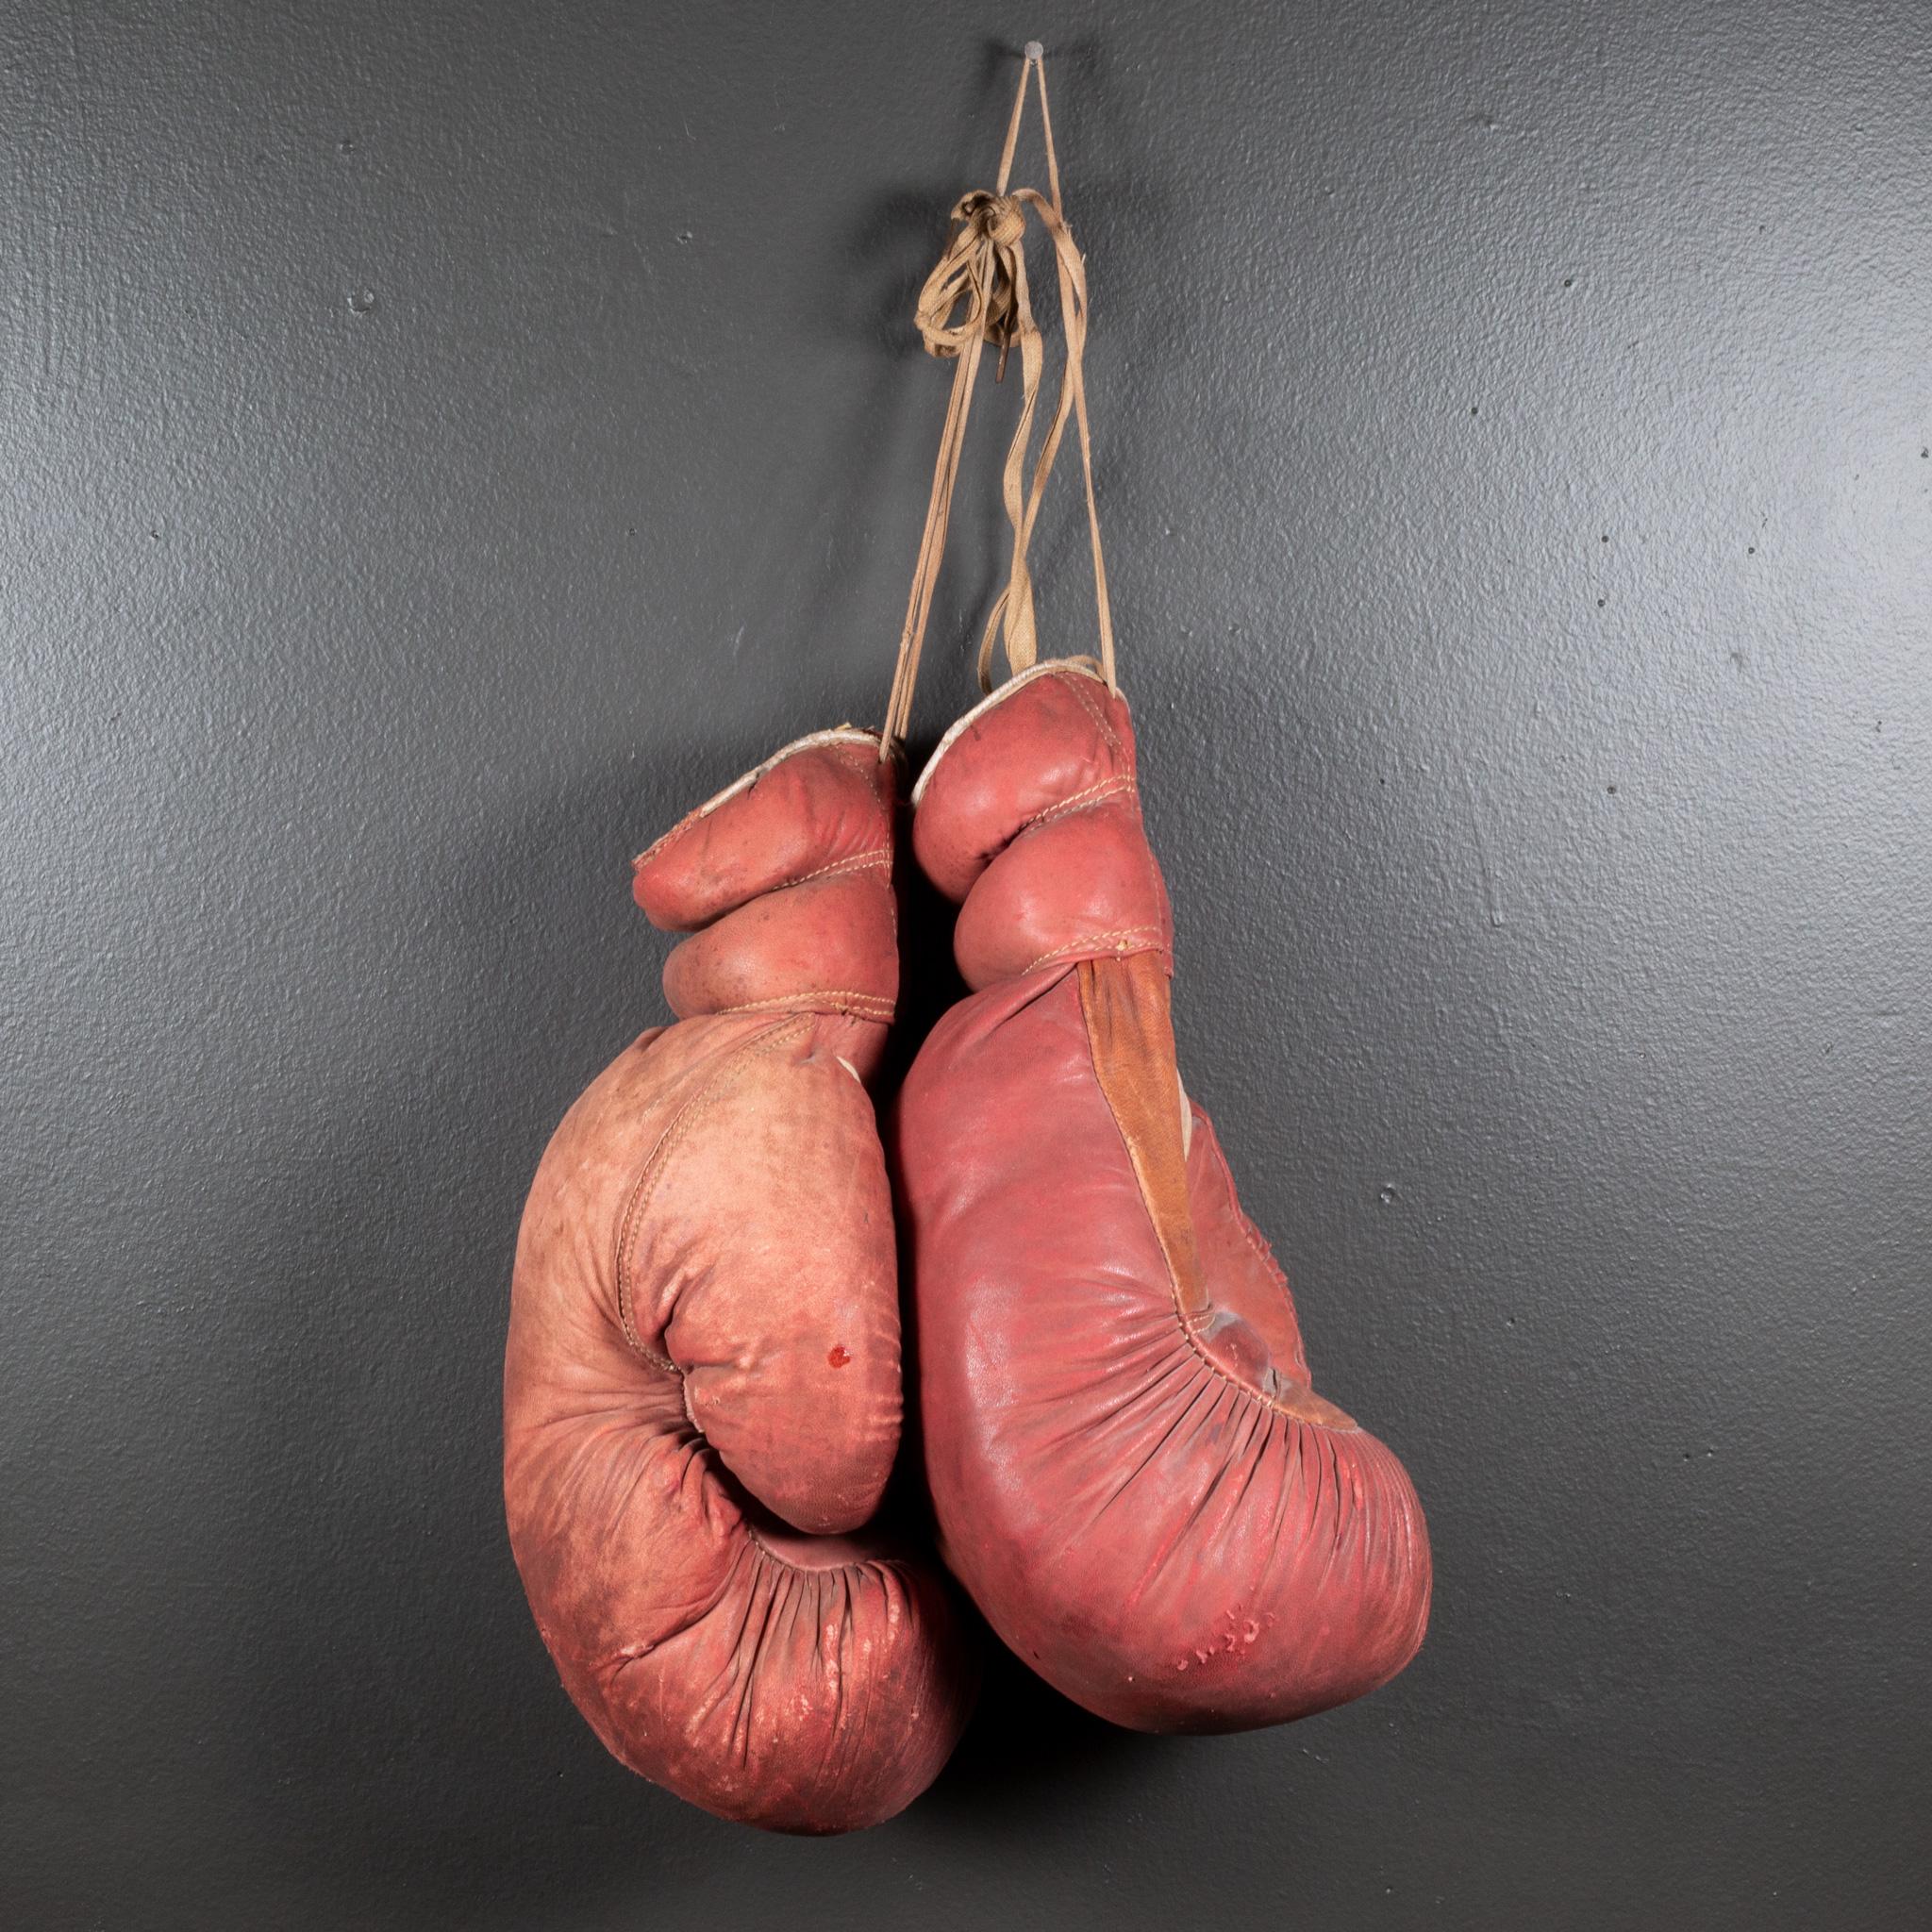 old boxing gloves